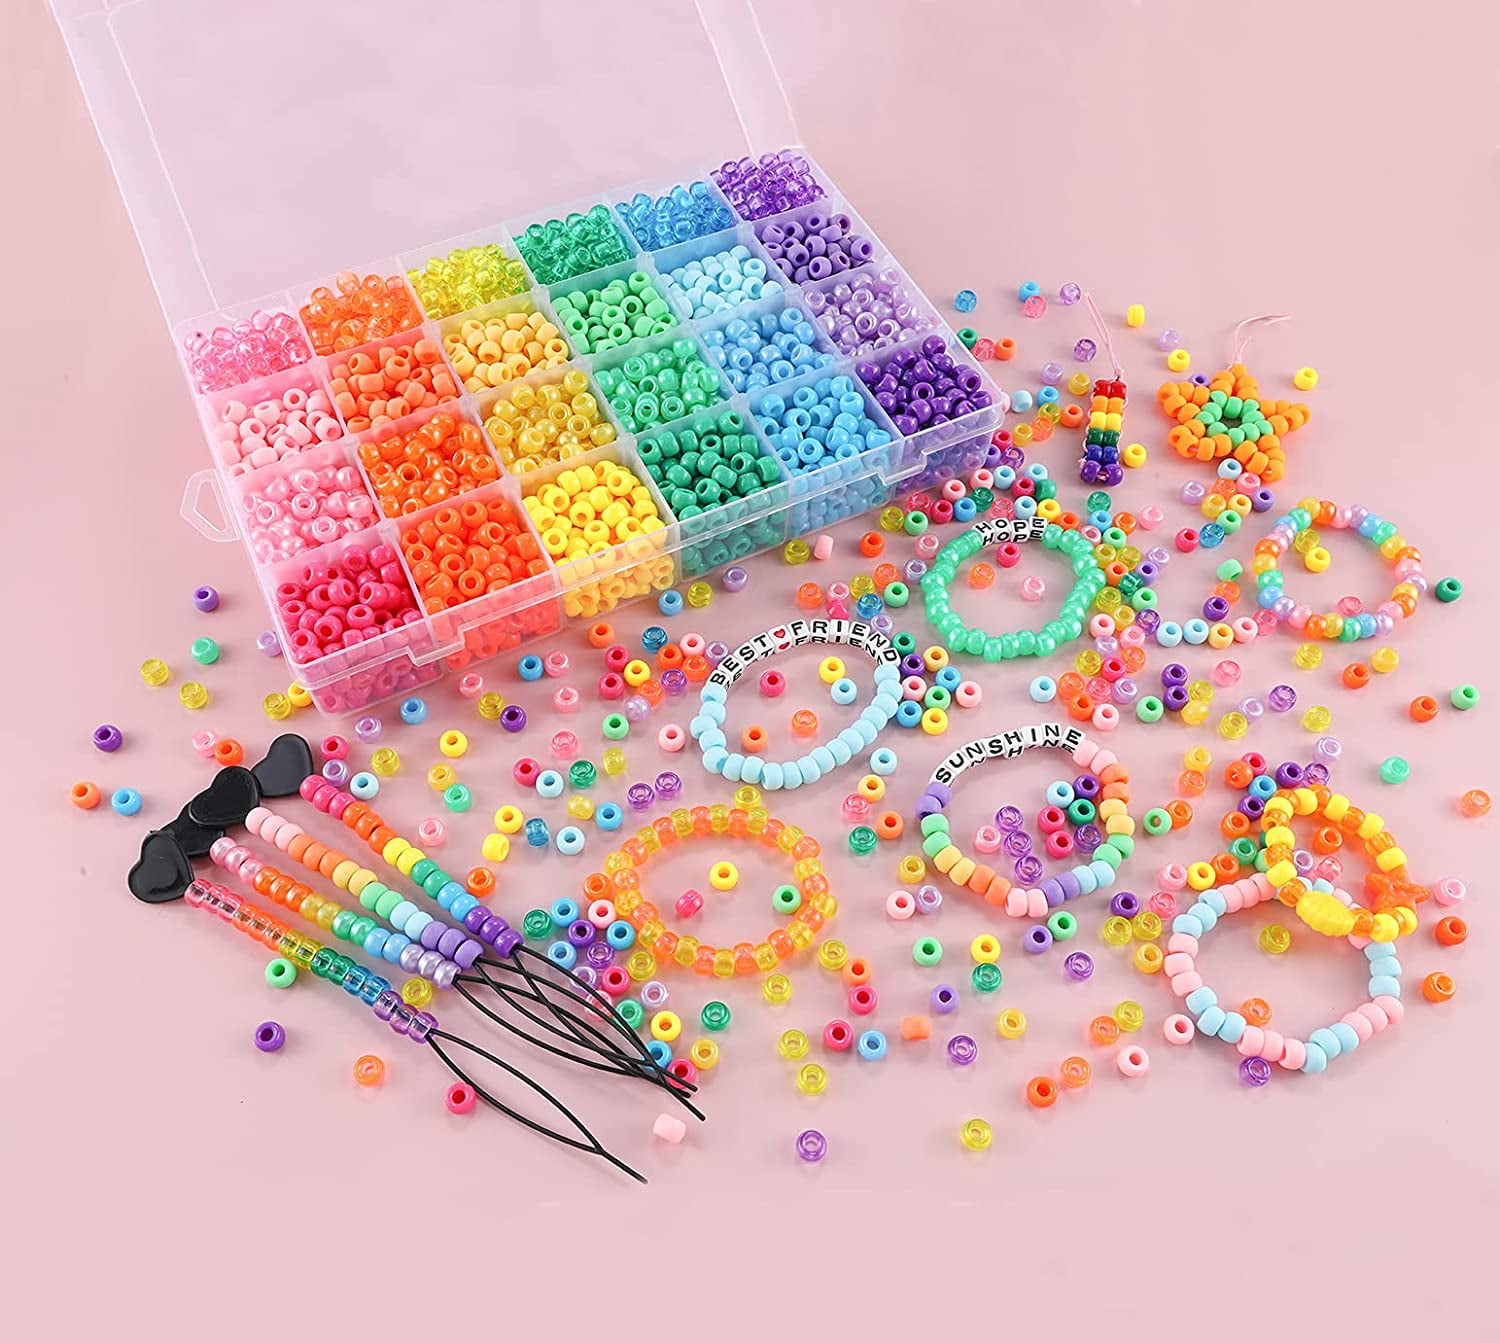 FLYCATDIARY Pony Beads Kit, 3000 pcs 9mm Pony Bead Kit Set in 18 Colors  with Letter Beads, Love Beads and Elastic String for Hair Braiding DIY